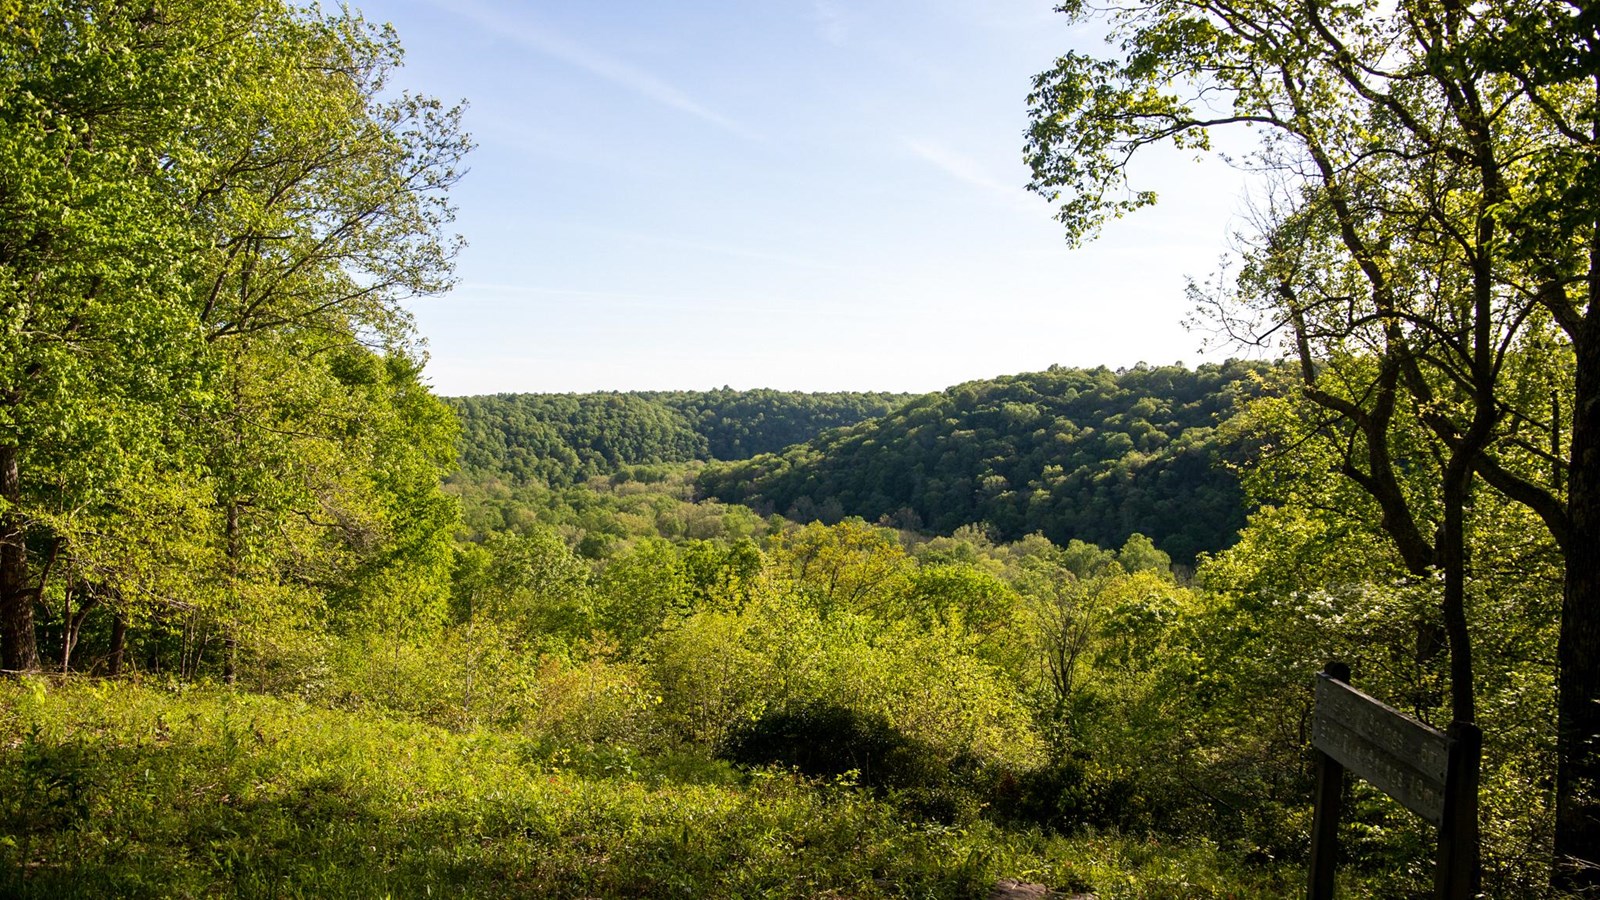 Bright green forest frames the distant view of rolling hills which descend to a river valley.